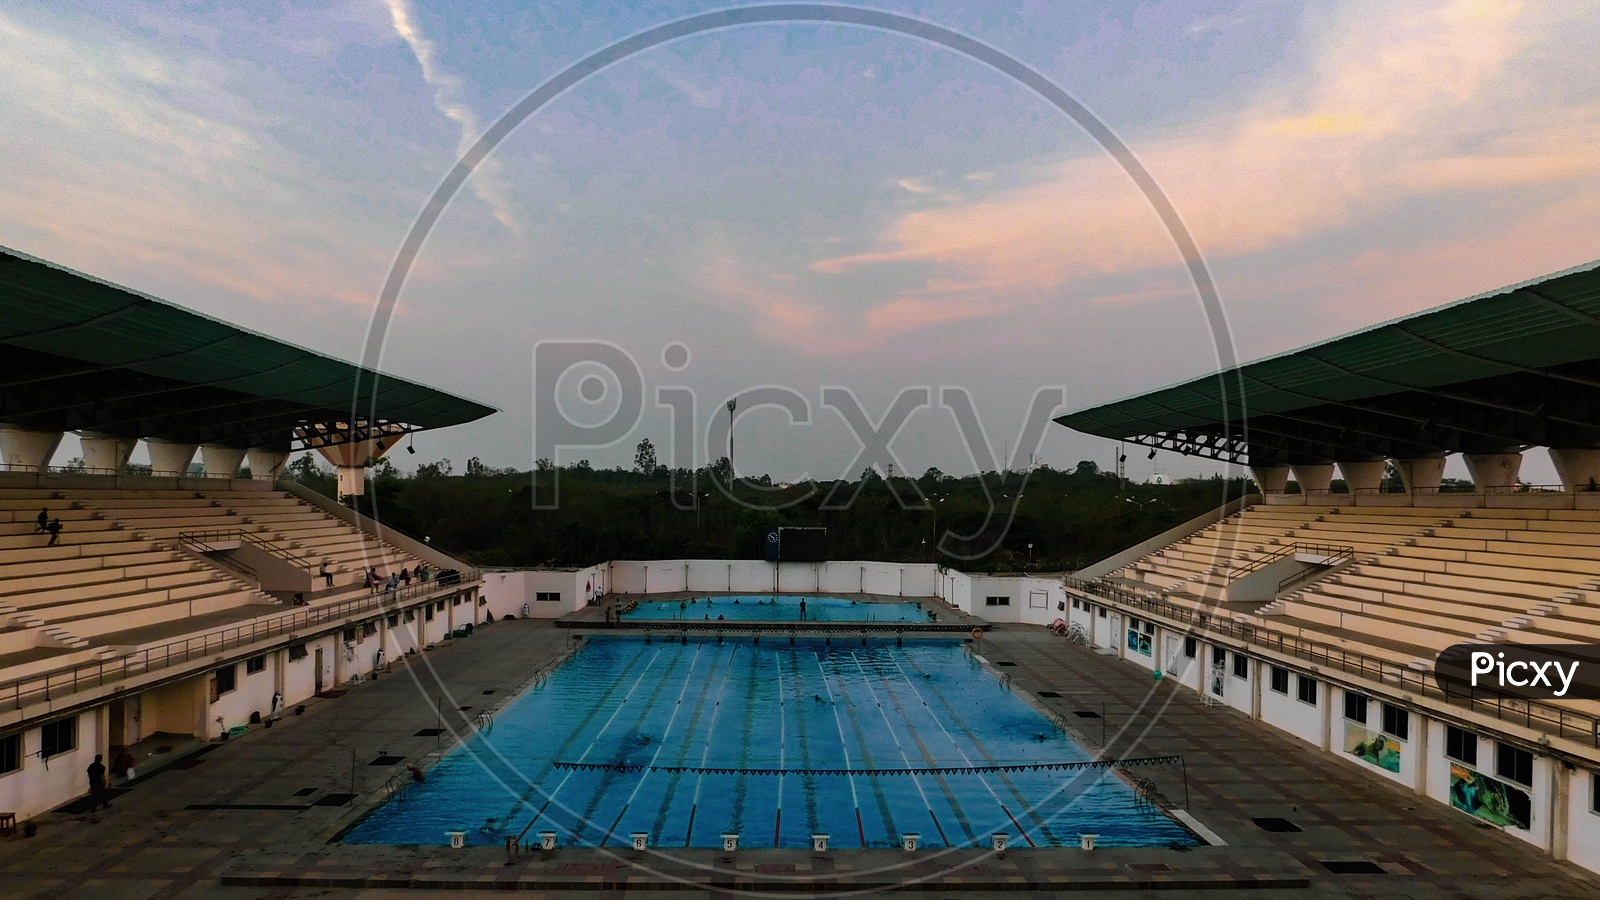 Olympic size pool shot with spectator gallery in frame